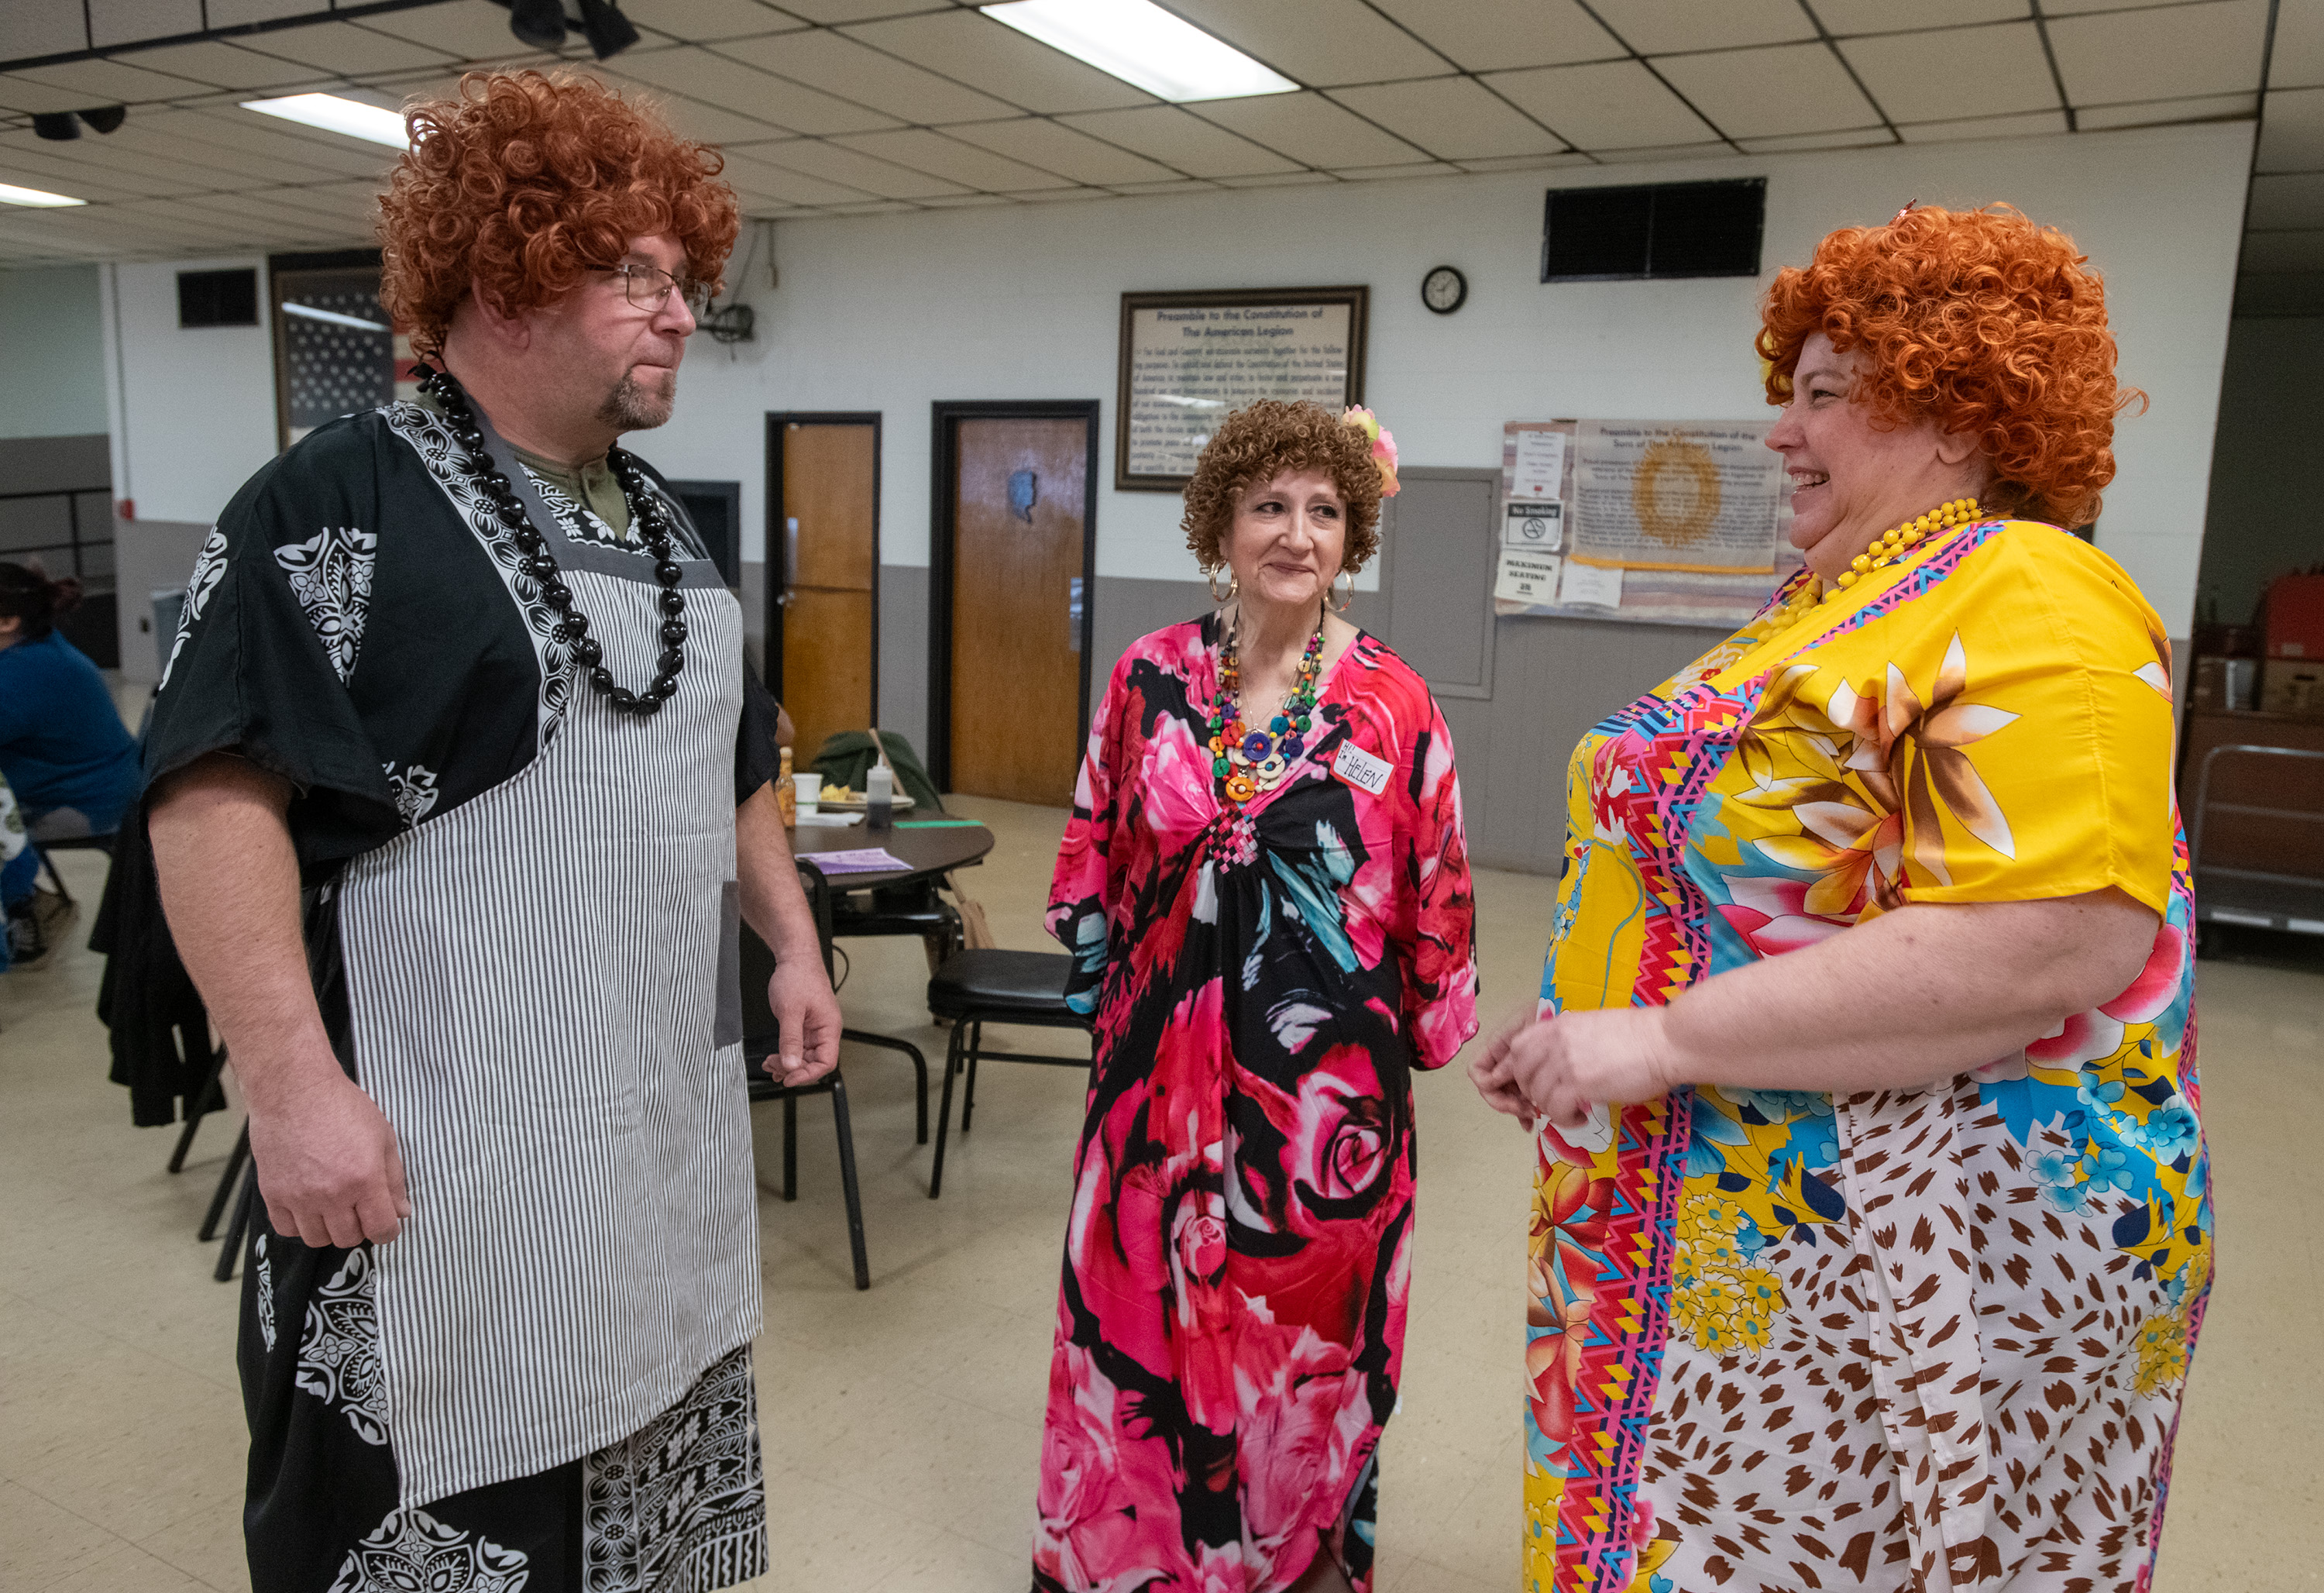 Niki Miller, right, of Valparaiso, laughs as Russell Simola, of Portage, shows off his best Mrs.Roper outfit while Karen Musto, of St. John, looks on prior to the start of breakfast service at the American Legion Post 100 in Lake Station, Indiana, on Sunday, April 21, 2024. The International Order of Mrs. Ropers, Northwest Indiana Chapter volunteered to serve breakfast for the day. (Andy Lavalley for the Post-Tribune)